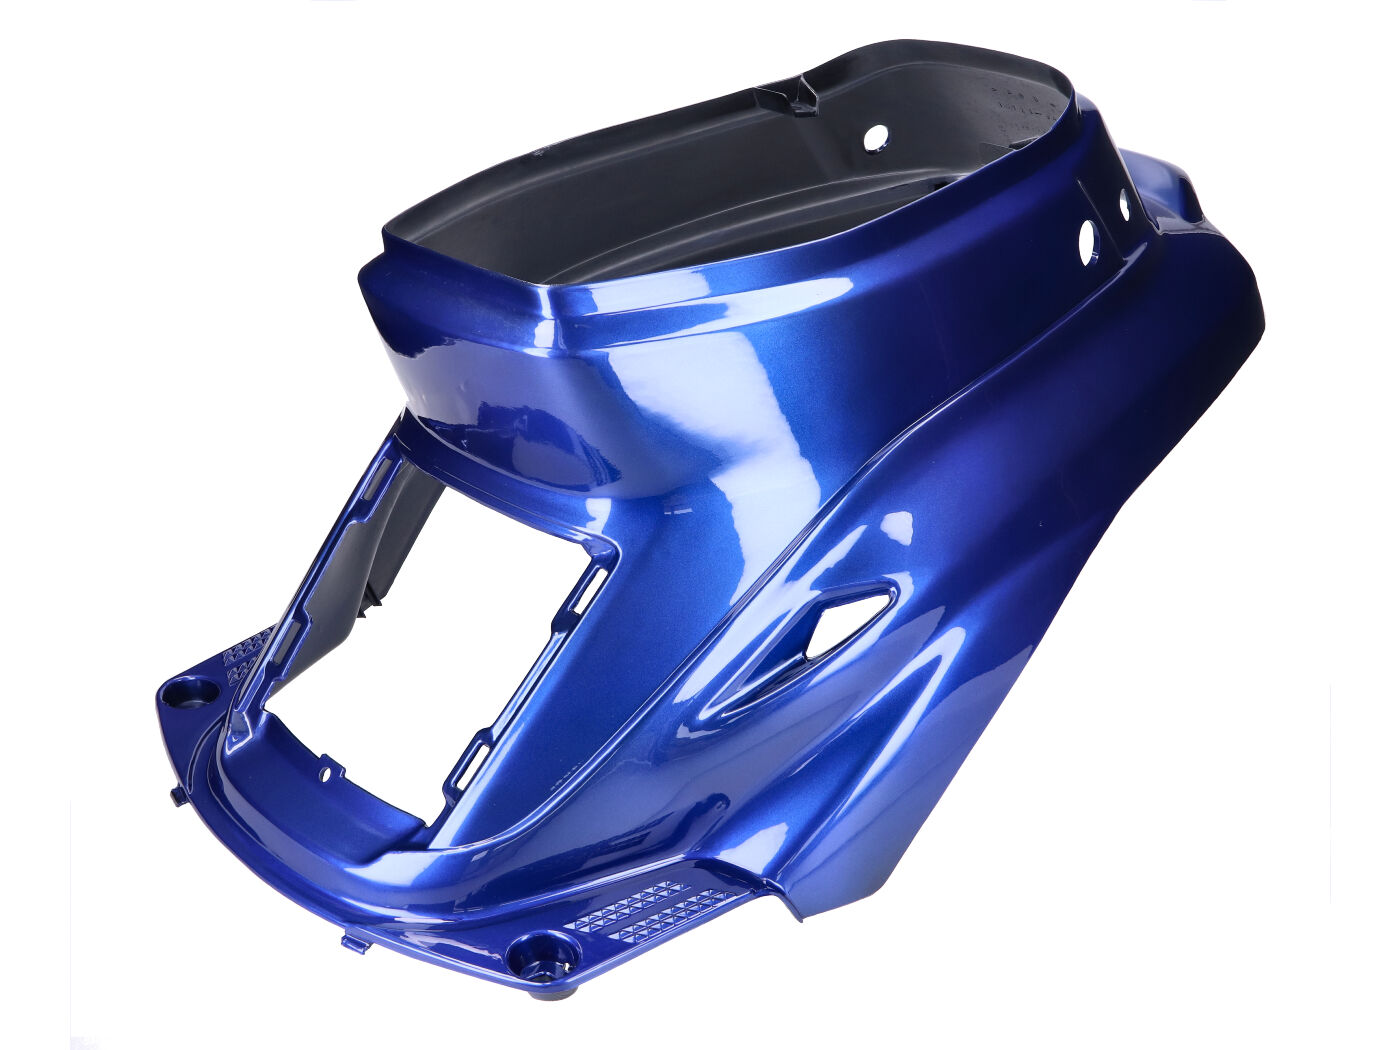 Parts For Scooters Body Plastics by TNT - fairing kit blue metallic 5-part  for MBK Booster, Scooter Parts, Racing Planet USA